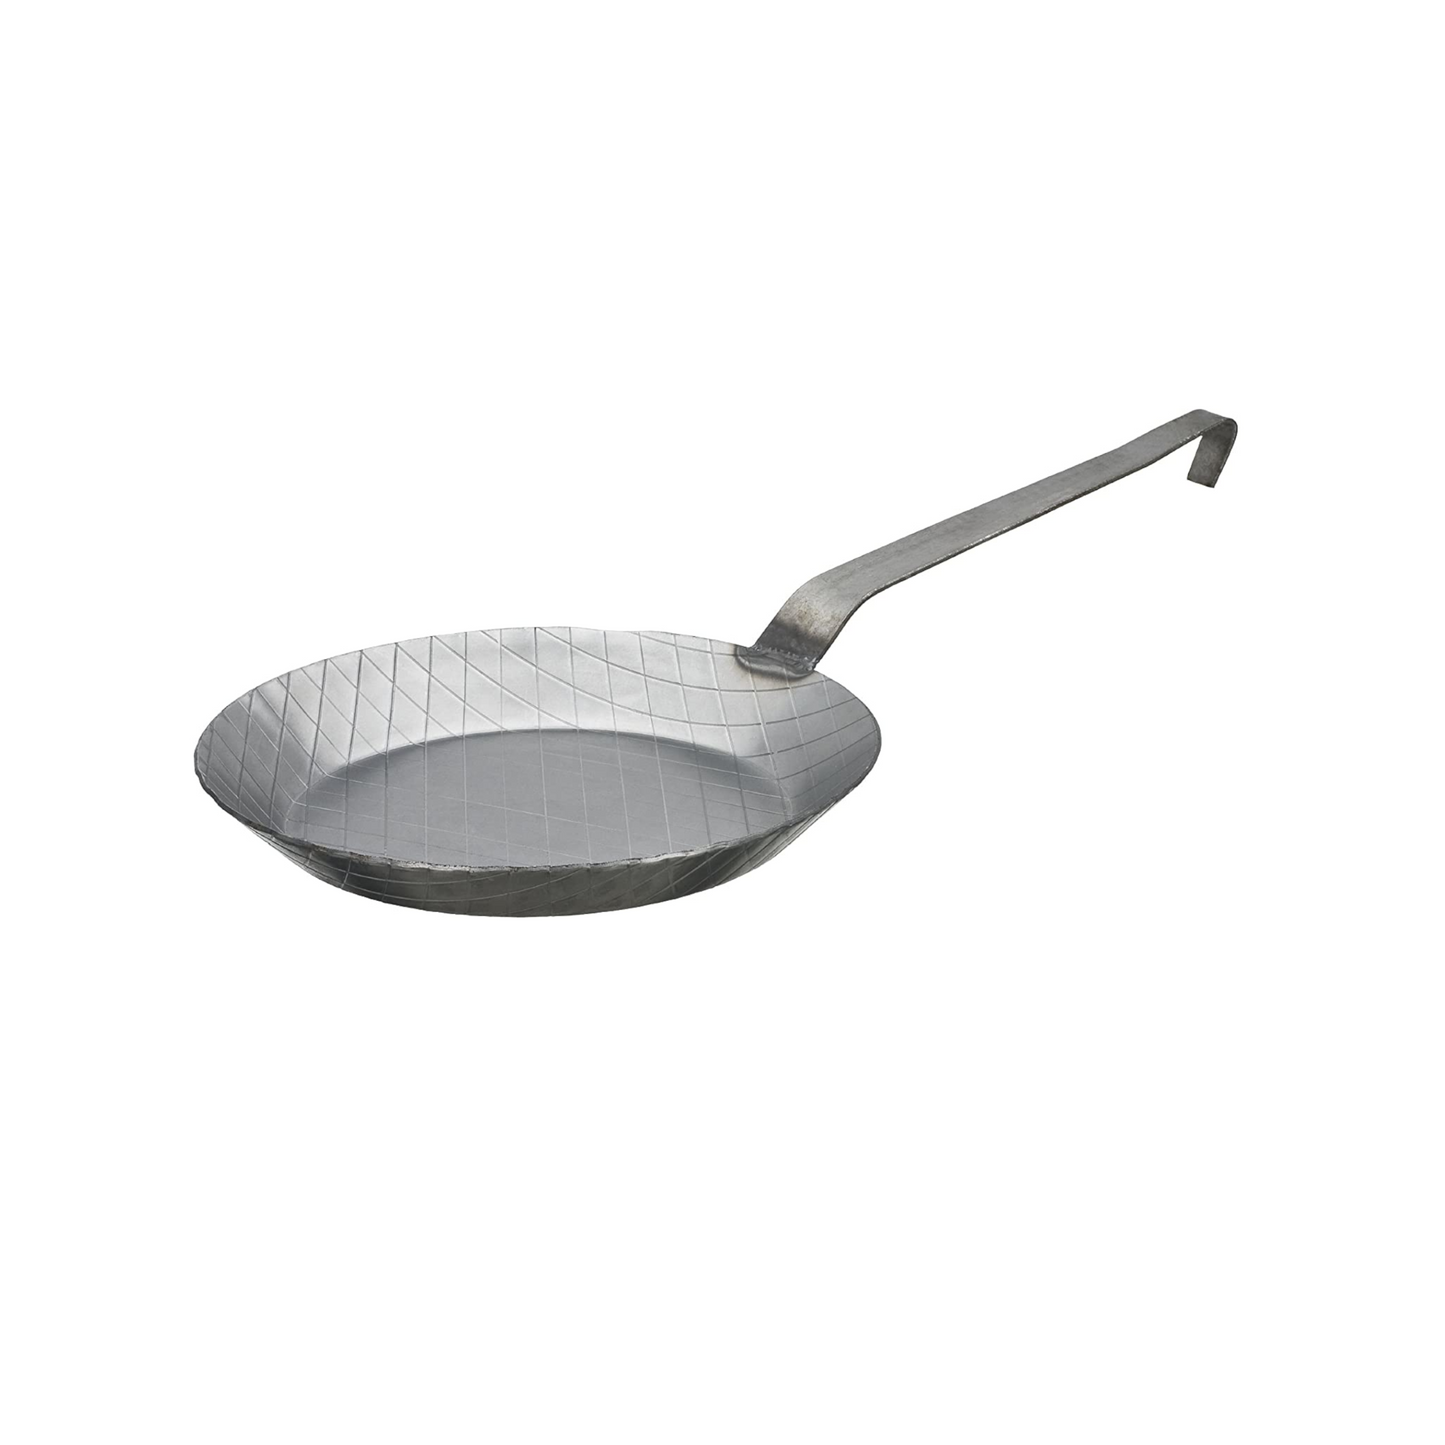 Cold-forged iron pan